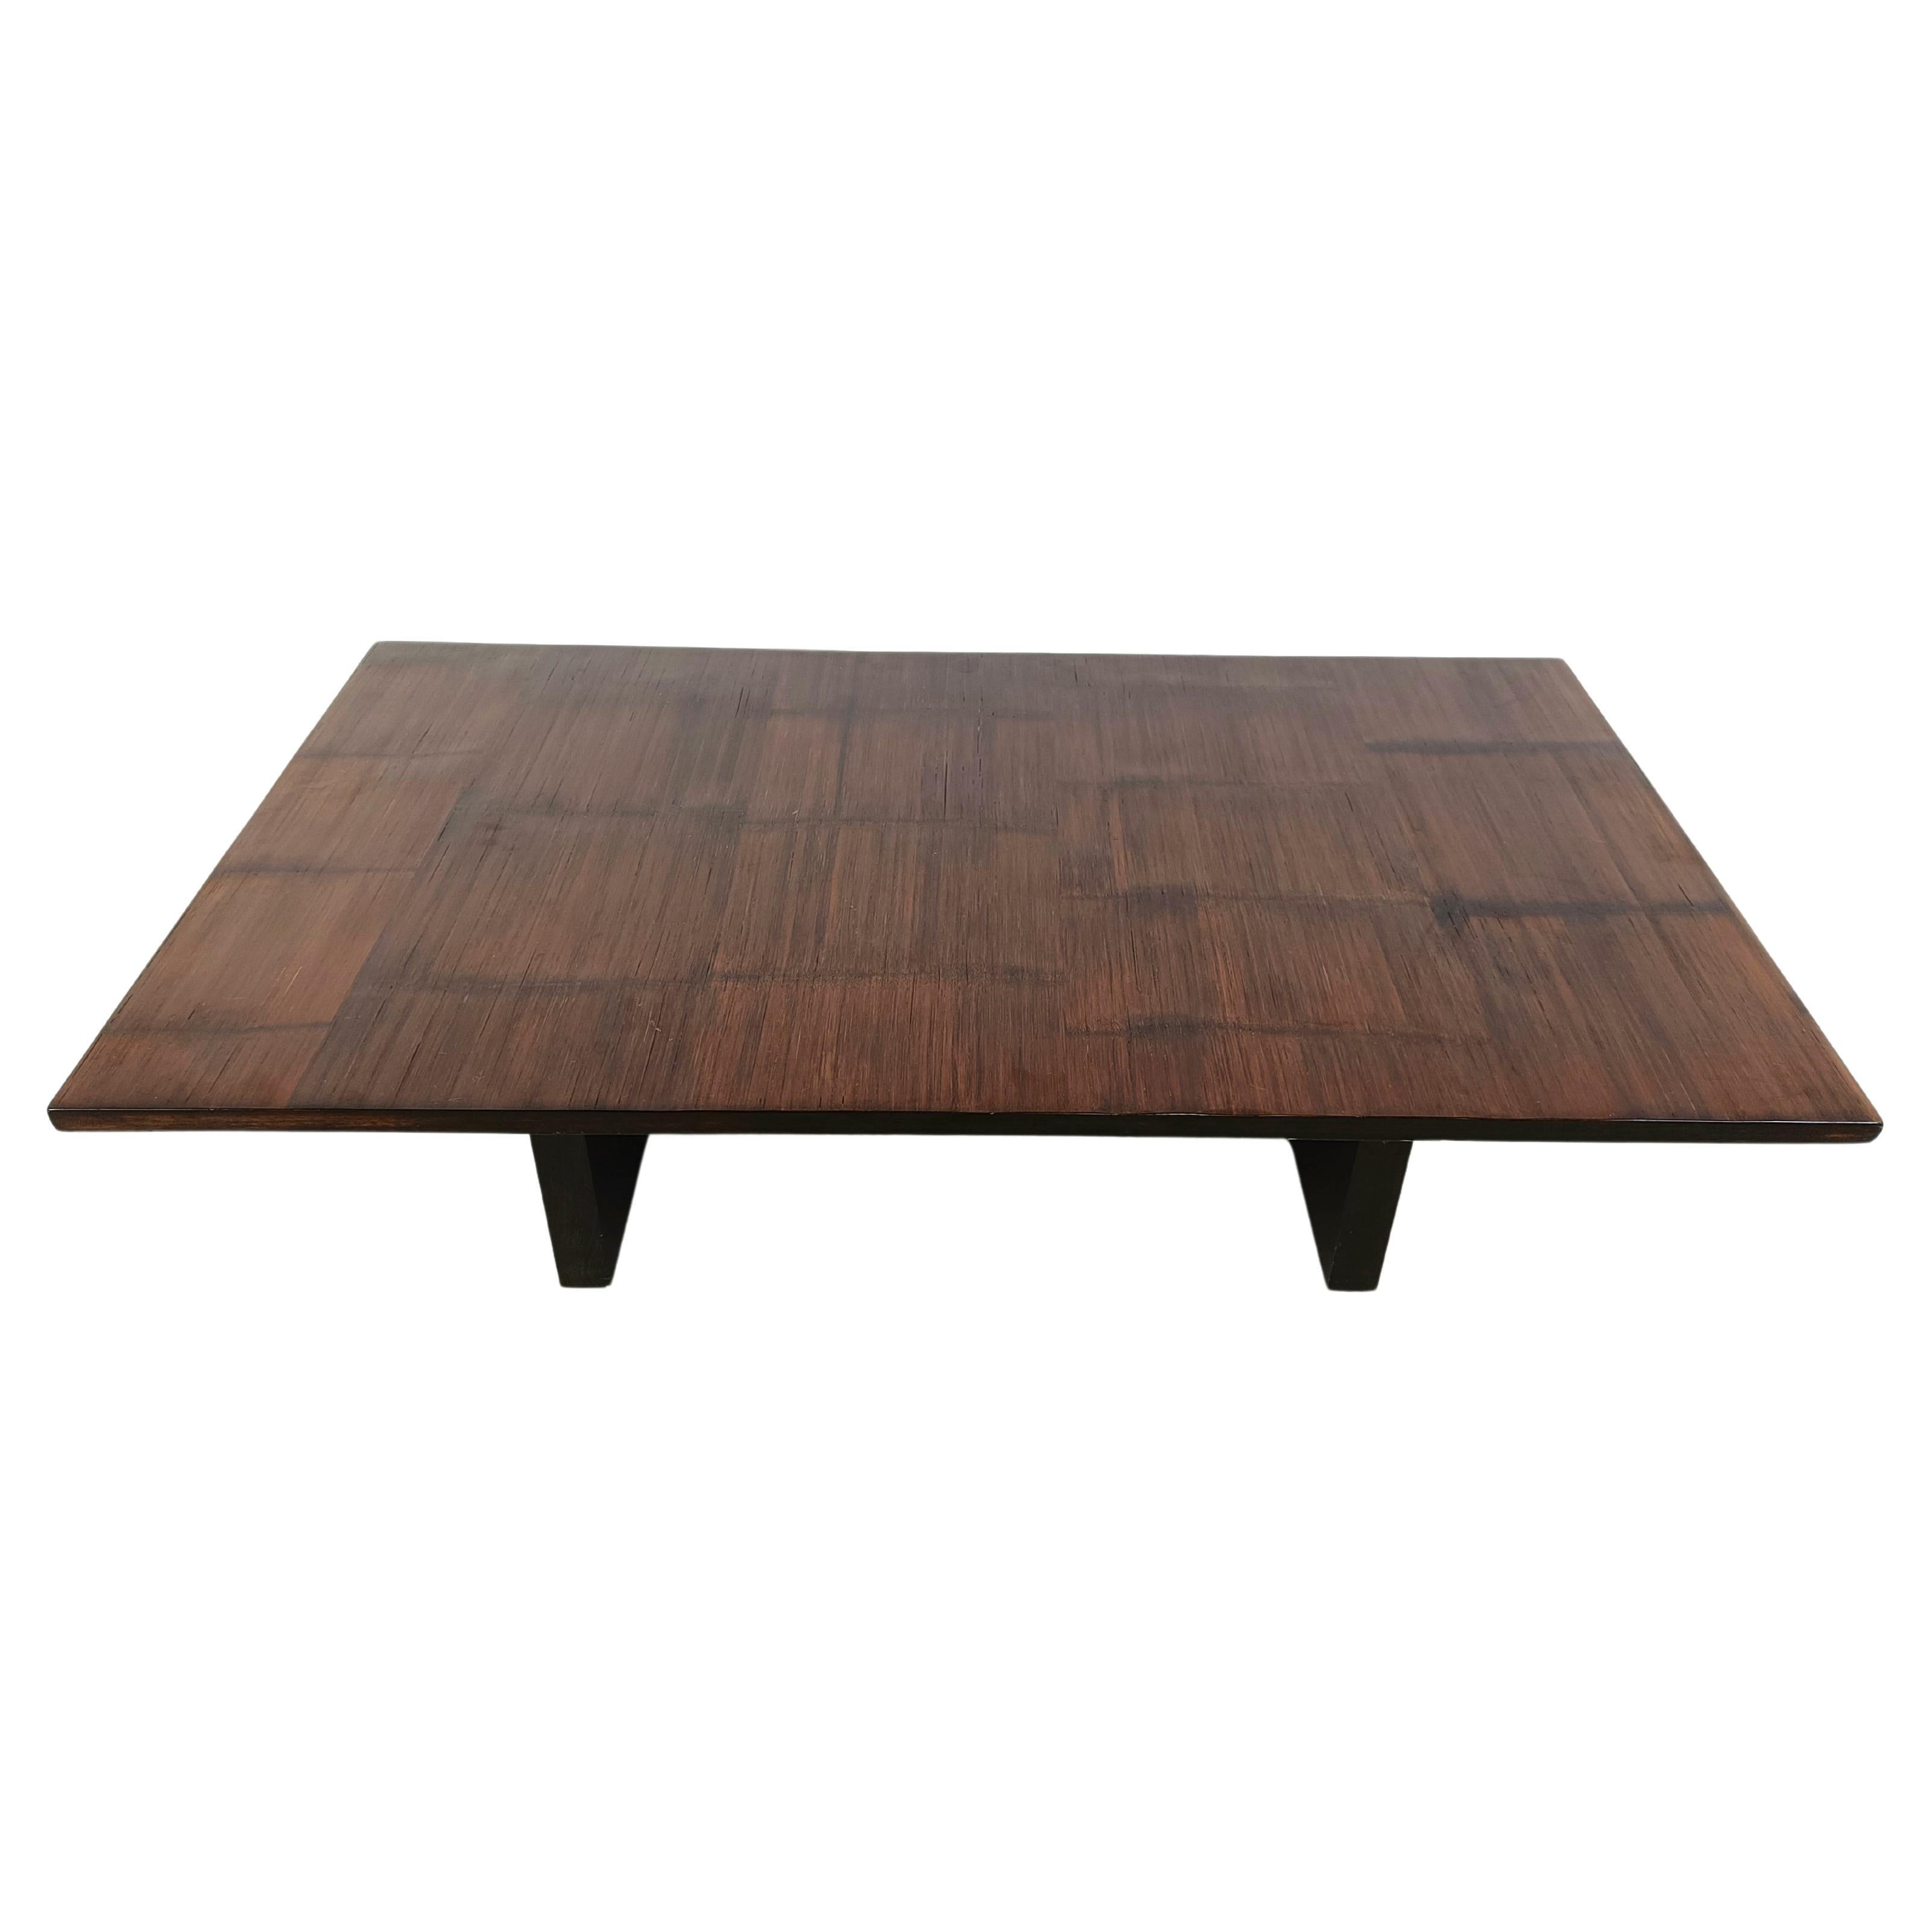 Belgian Coffee Table in Wenge and Bamboo by Axel Vervoordt, 1980s